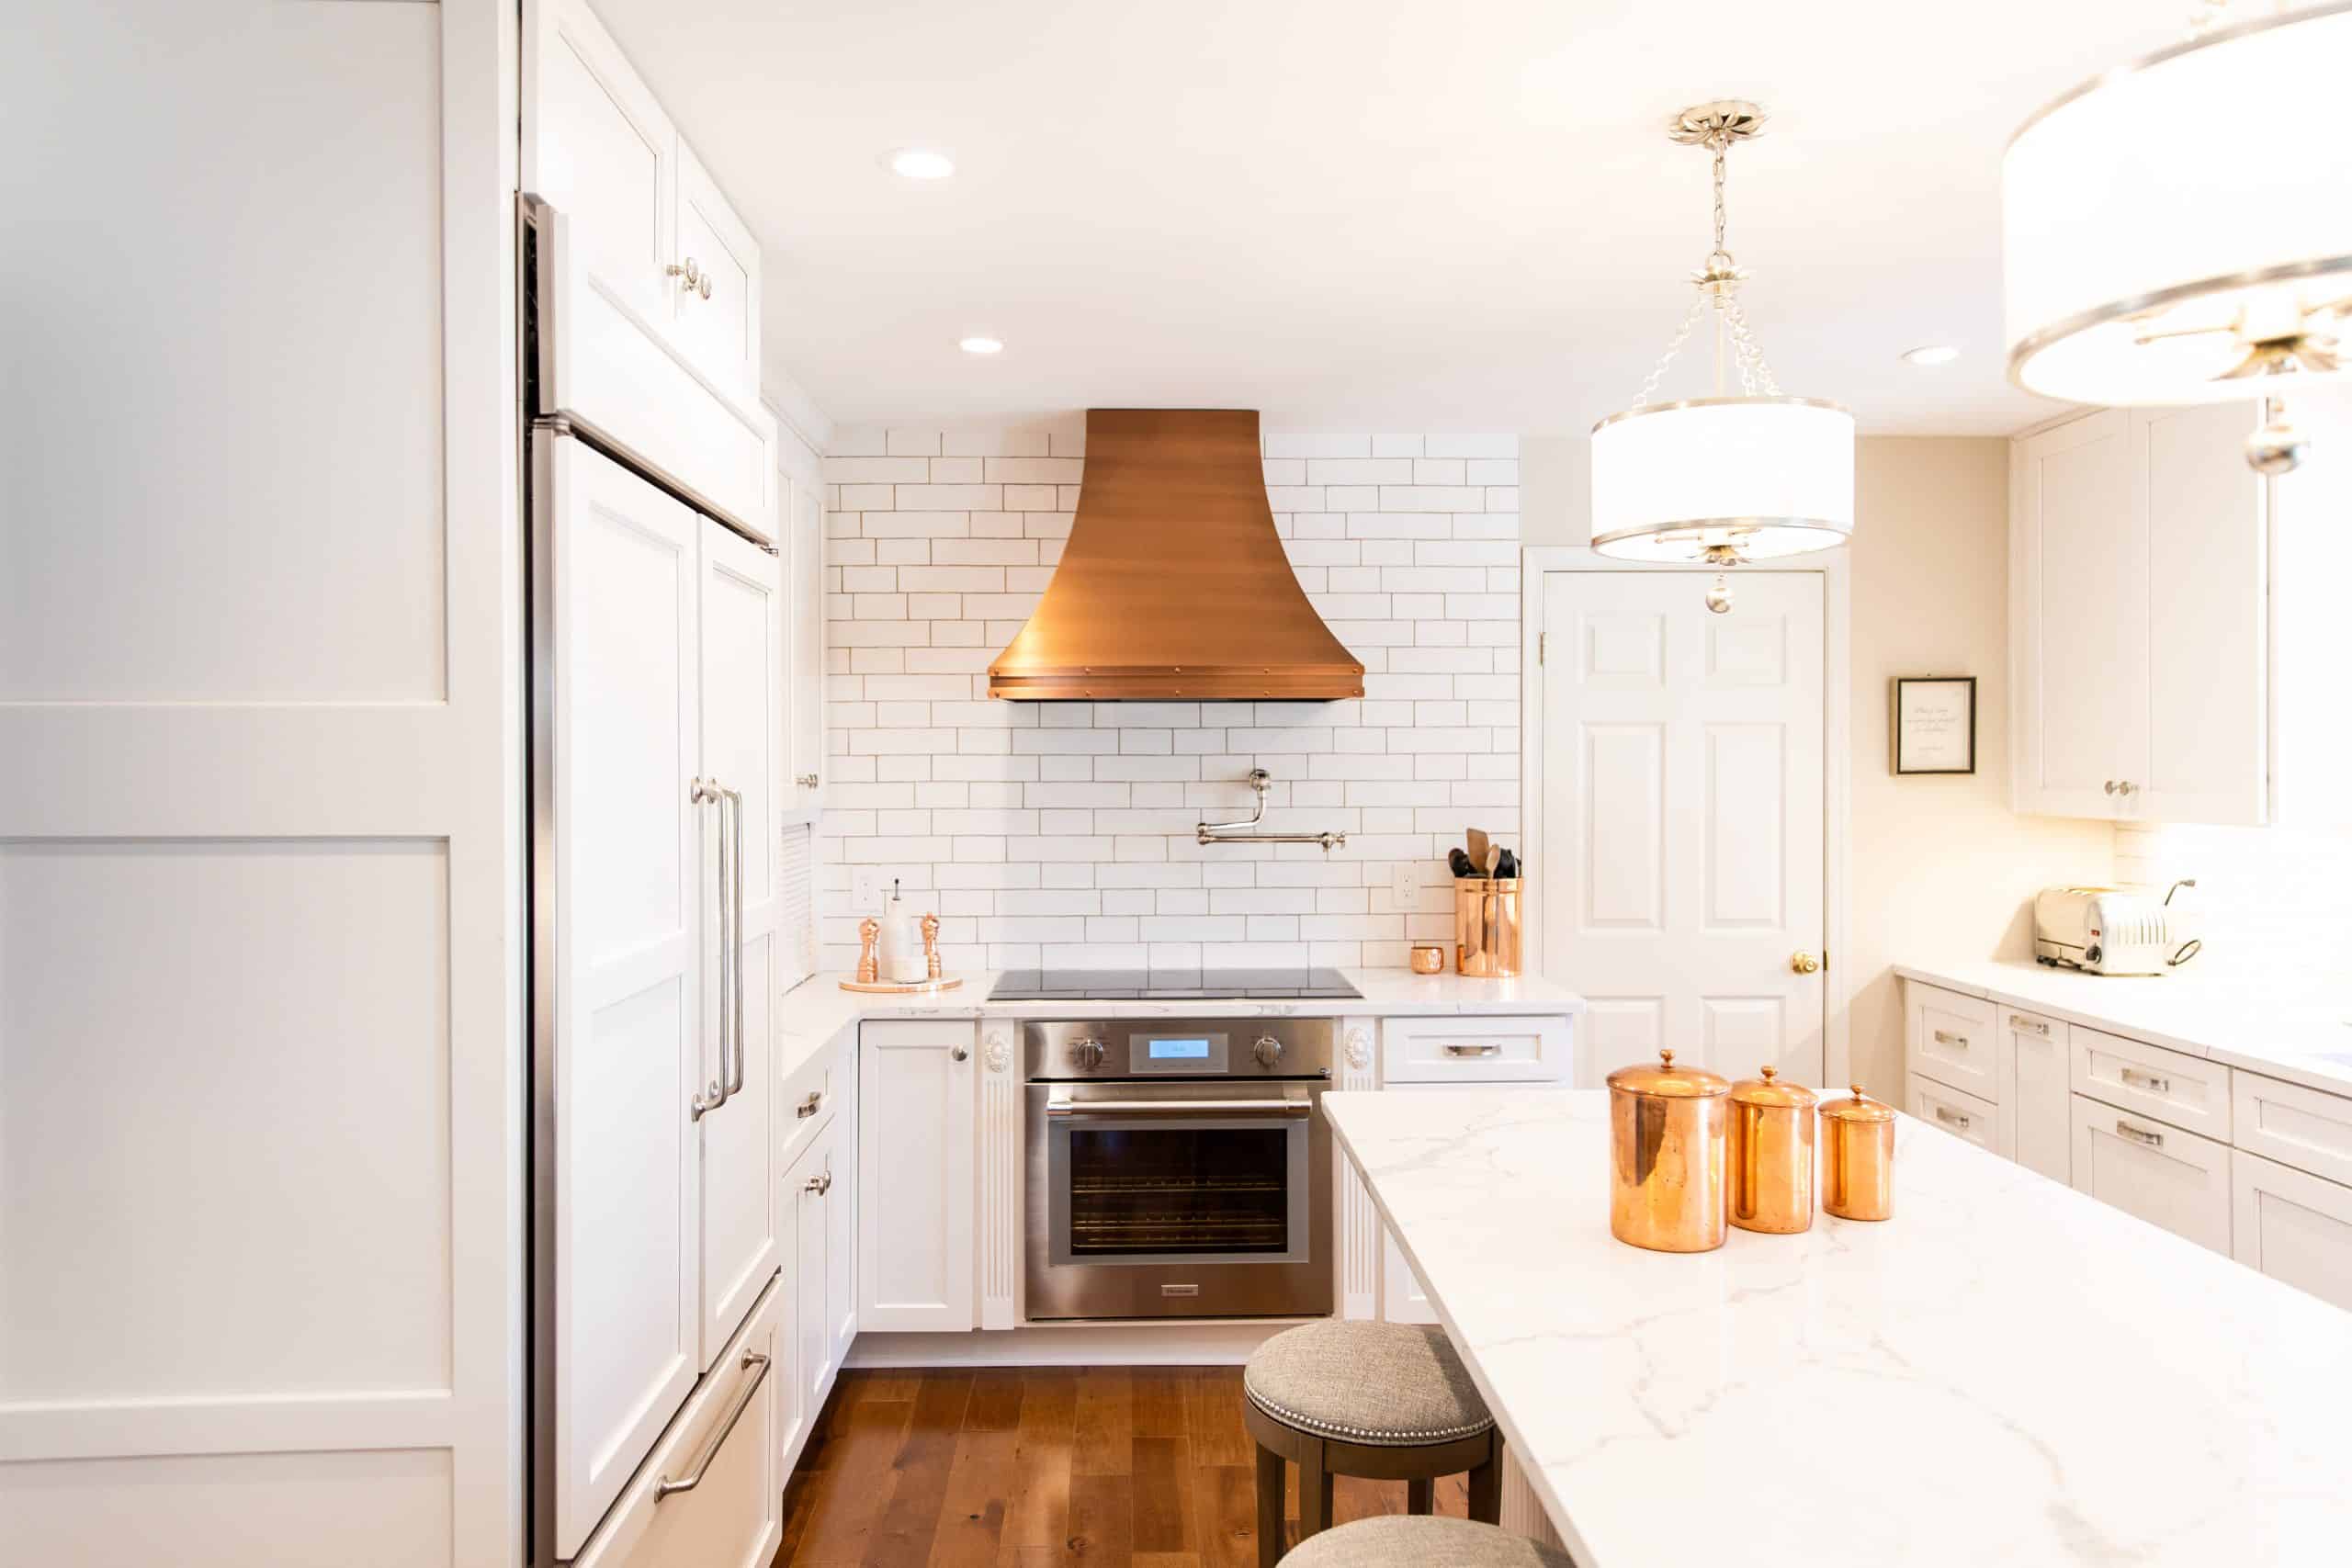 How to renovate your kitchen without changing the cabinets - The Washington  Post